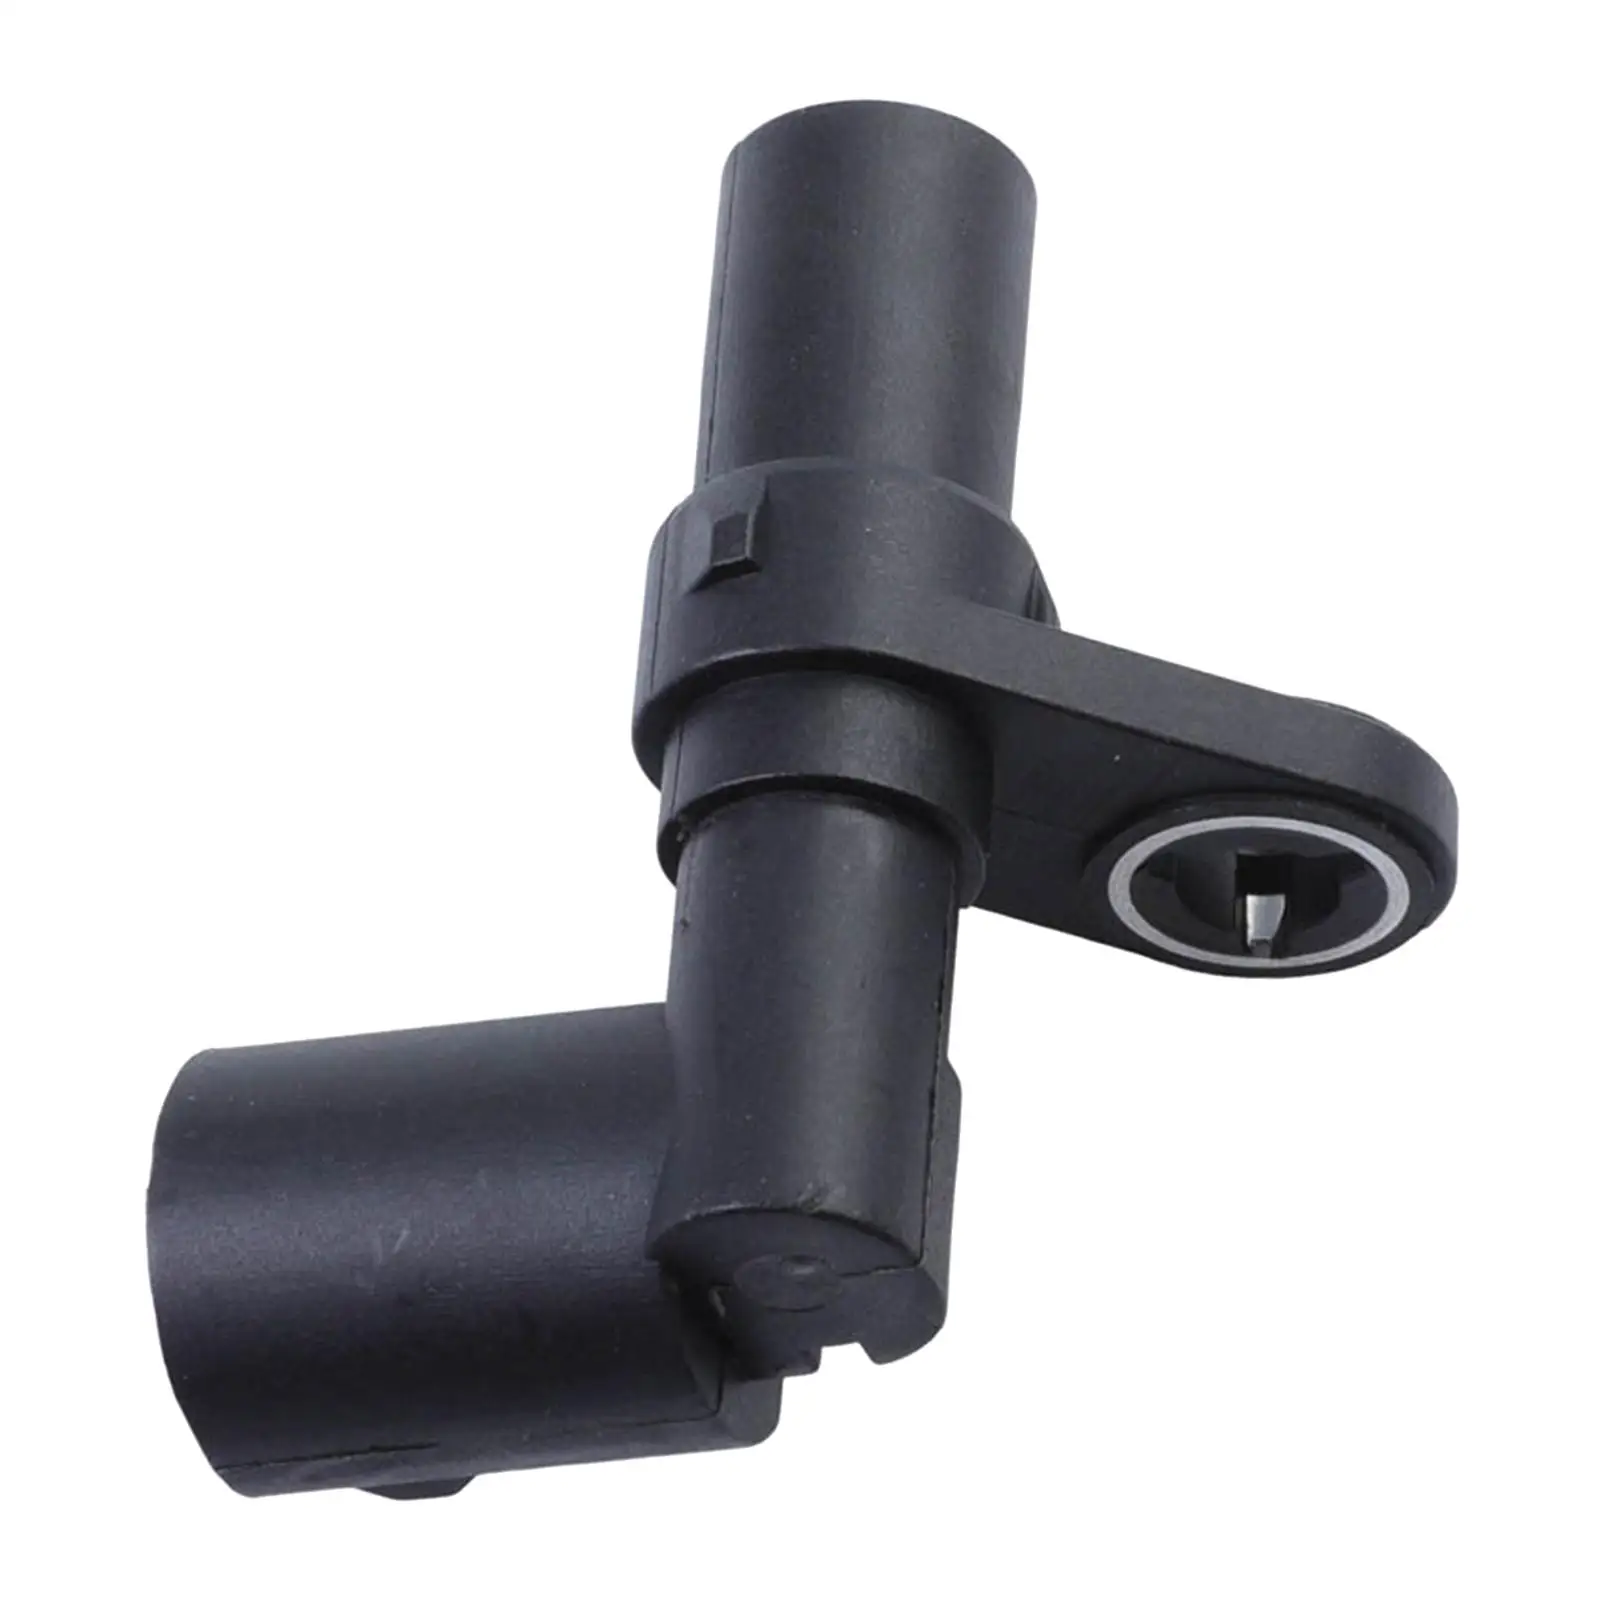 Crankshaft Position Sensor Glossy Appearance Convenient Installation Auto Parts Replaces for Renault Kangoo 2002 to 2007